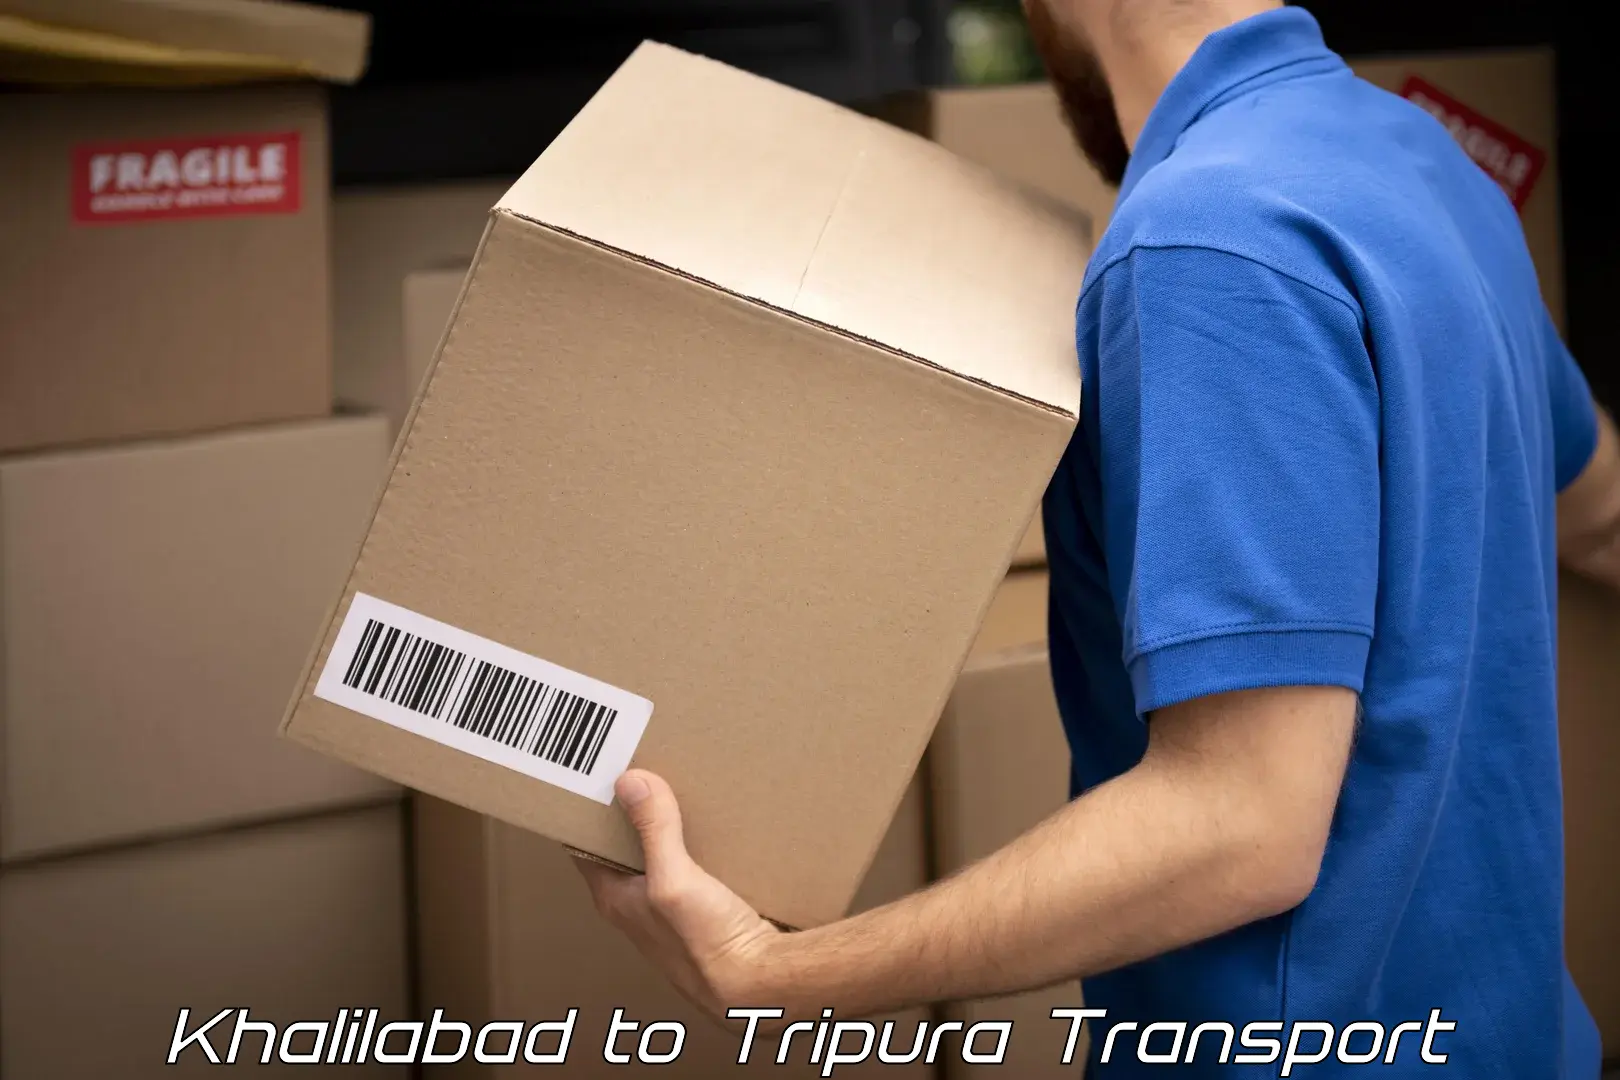 Truck transport companies in India Khalilabad to Udaipur Tripura